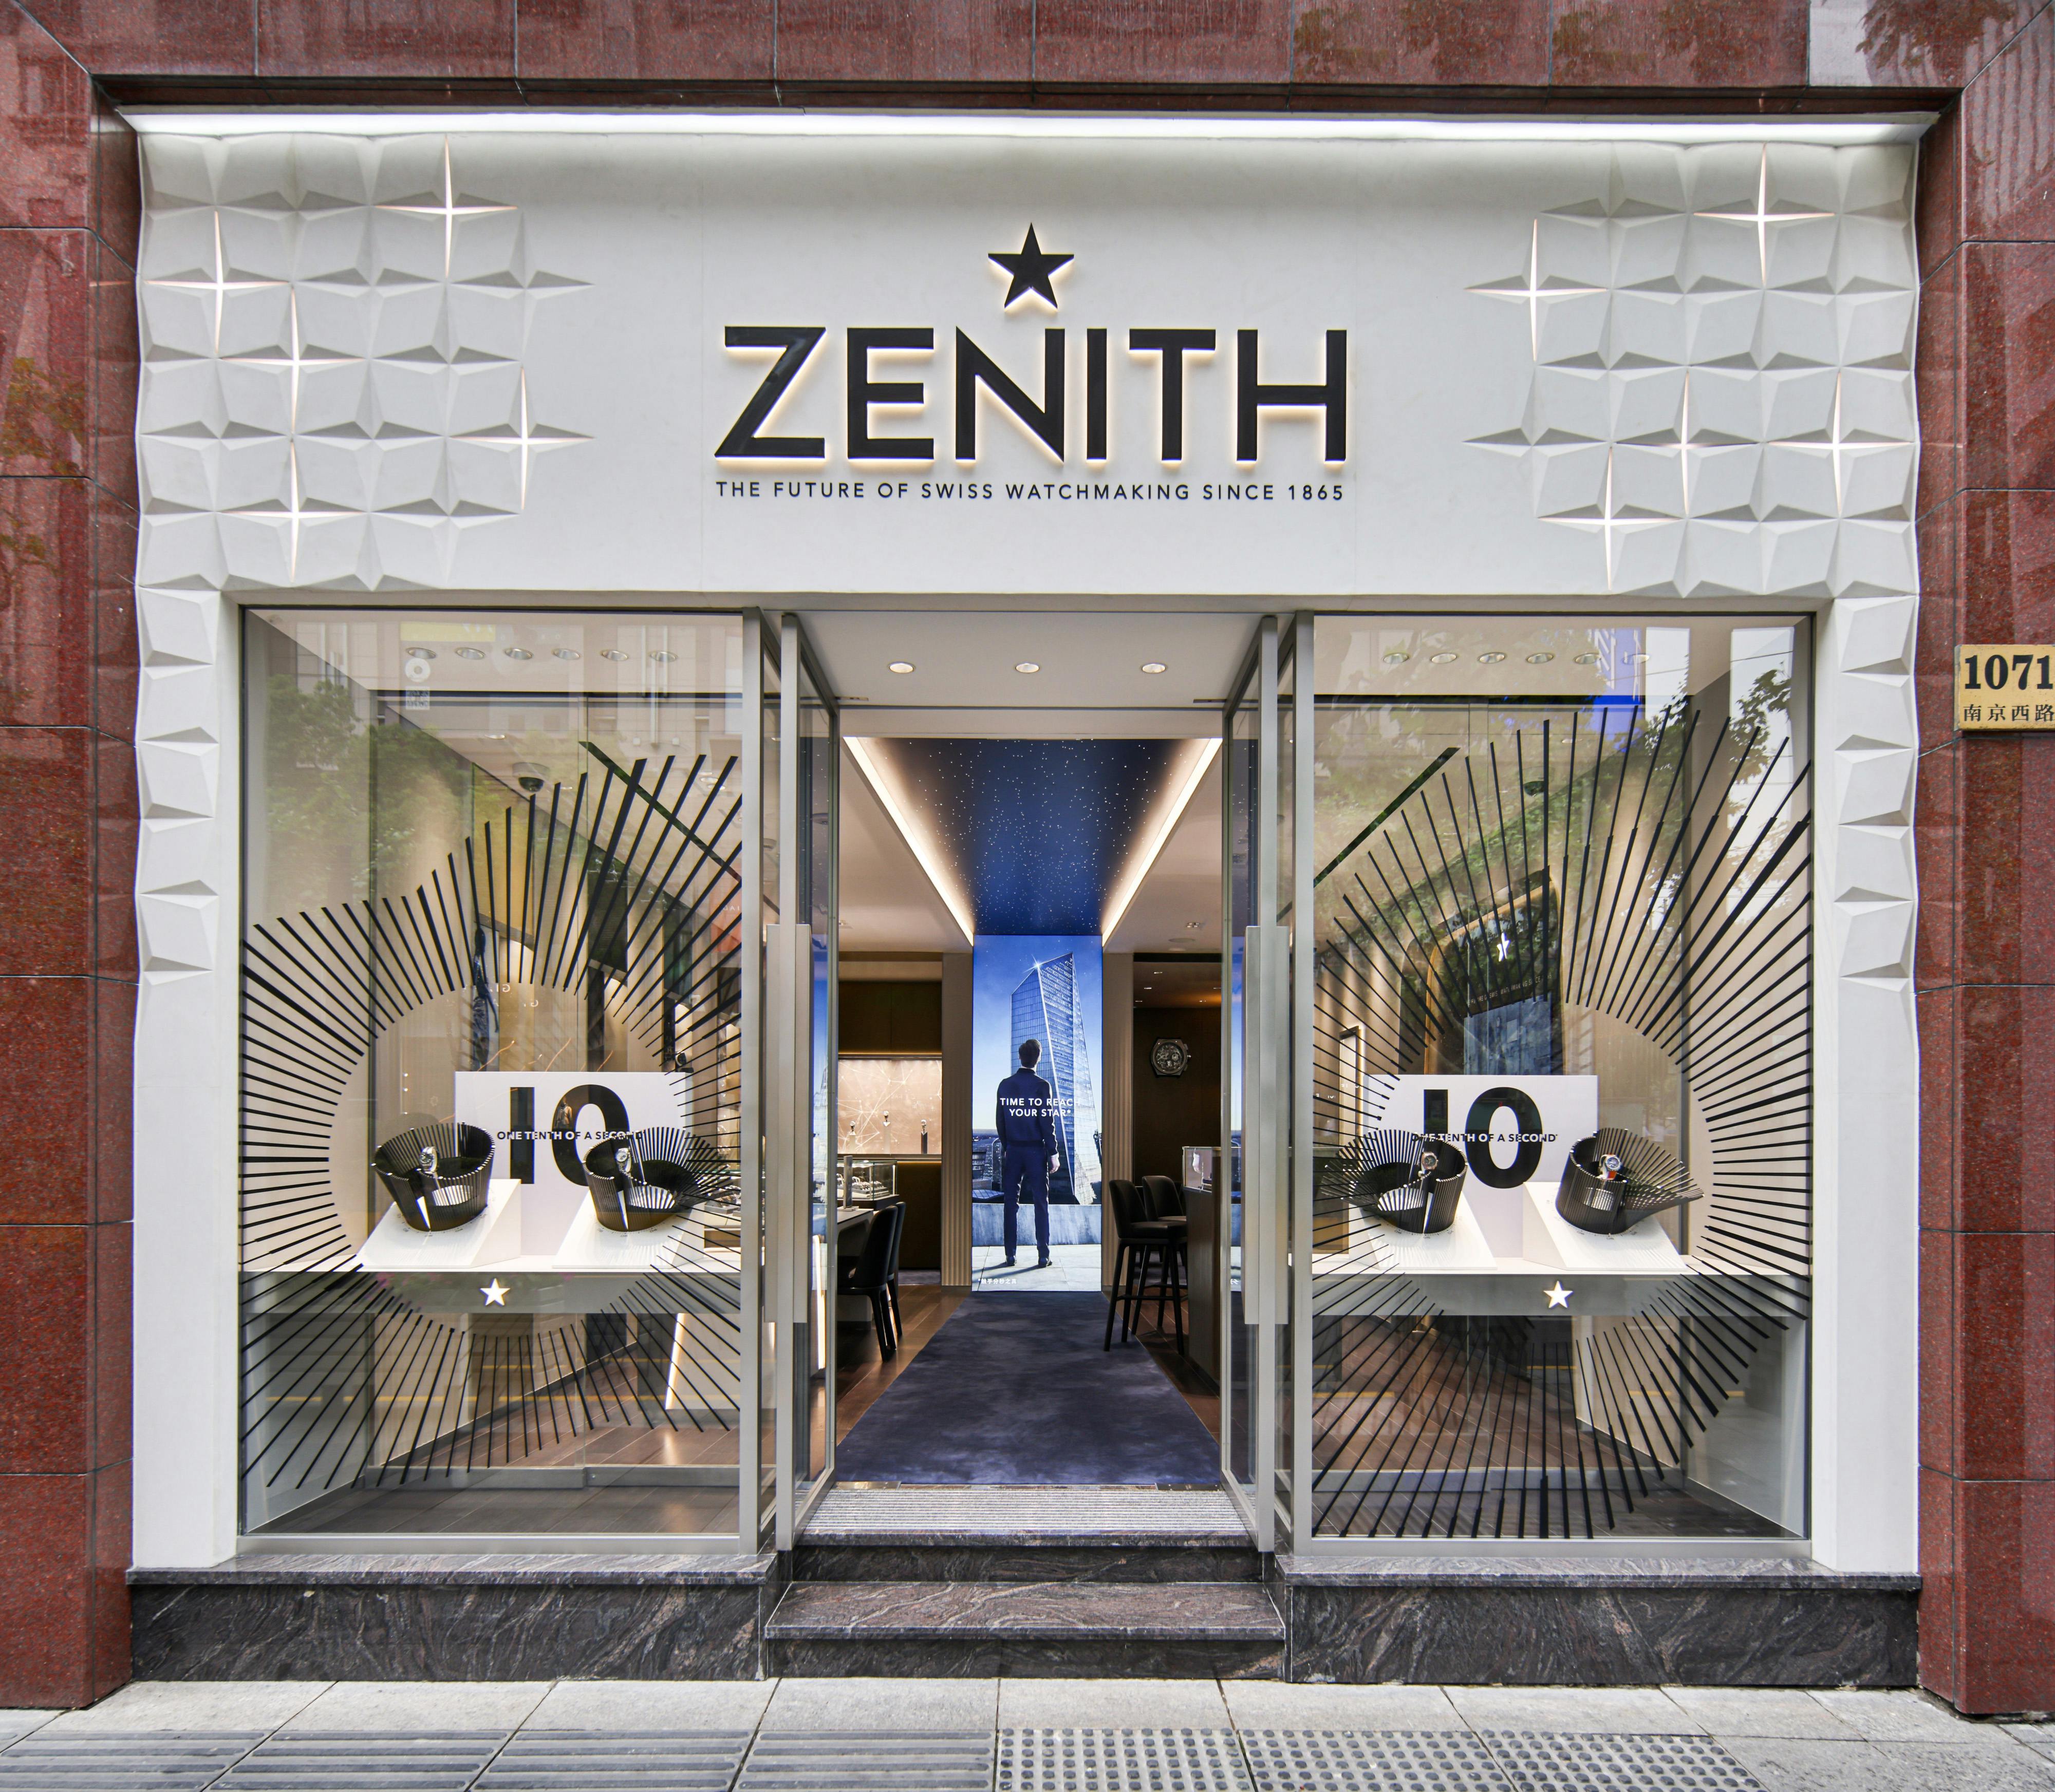 ZENITH OPENS THE DOORS TO ITS NEWLY REVAMPED SHANGHAI AND PARIS LE BON MARCHÉ BOUTIQUES